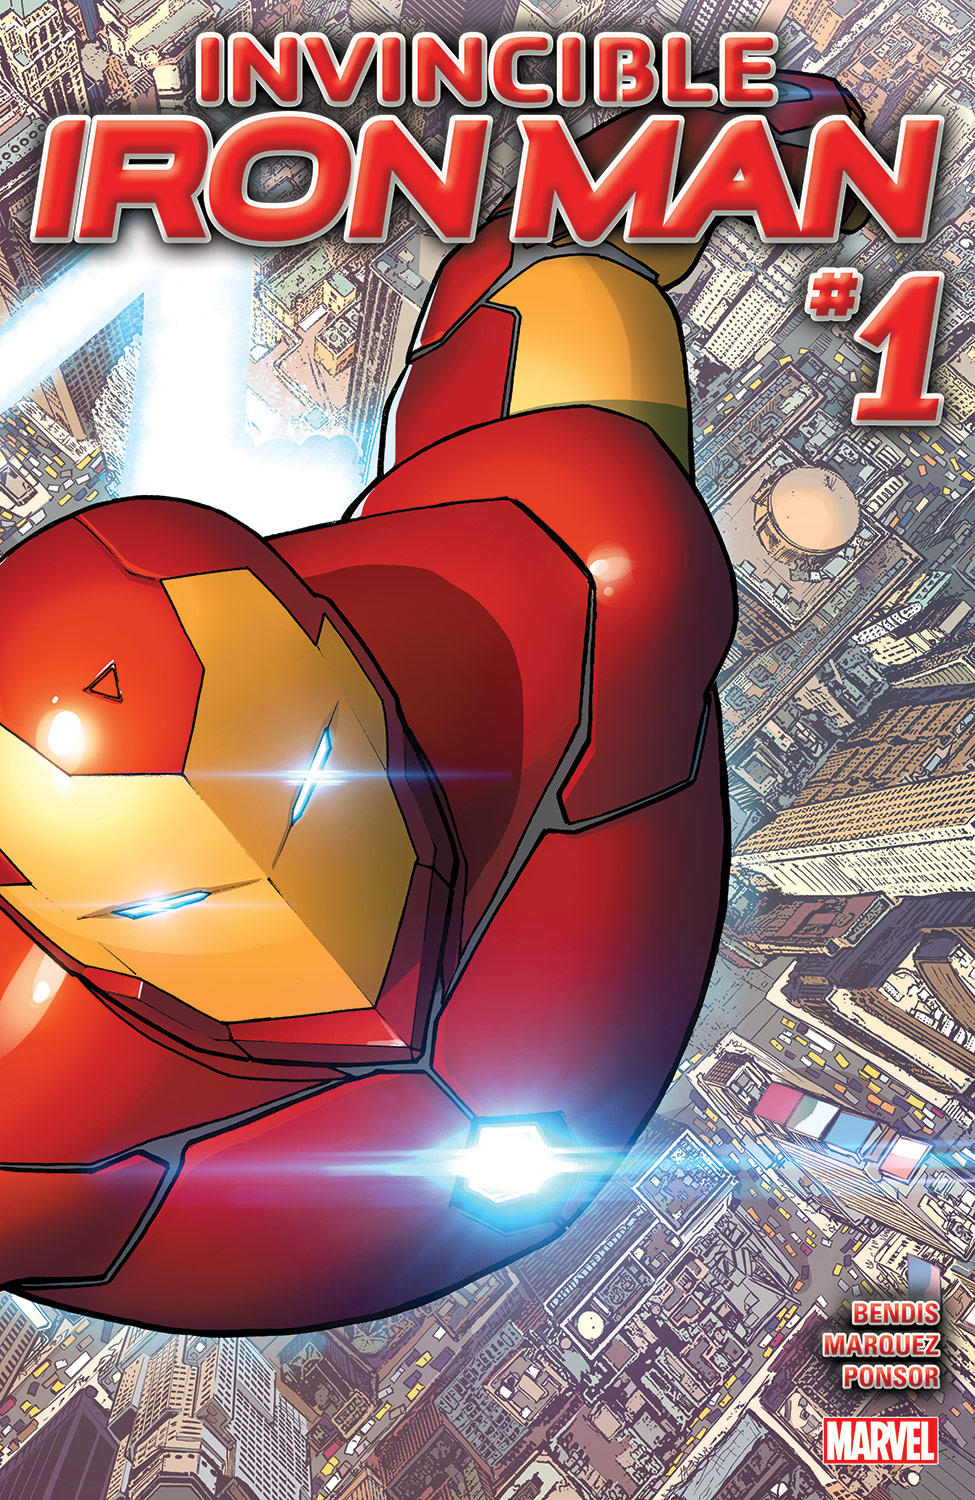 Invincible Iron Man (2015) #1 | Comic Issues | Marvel